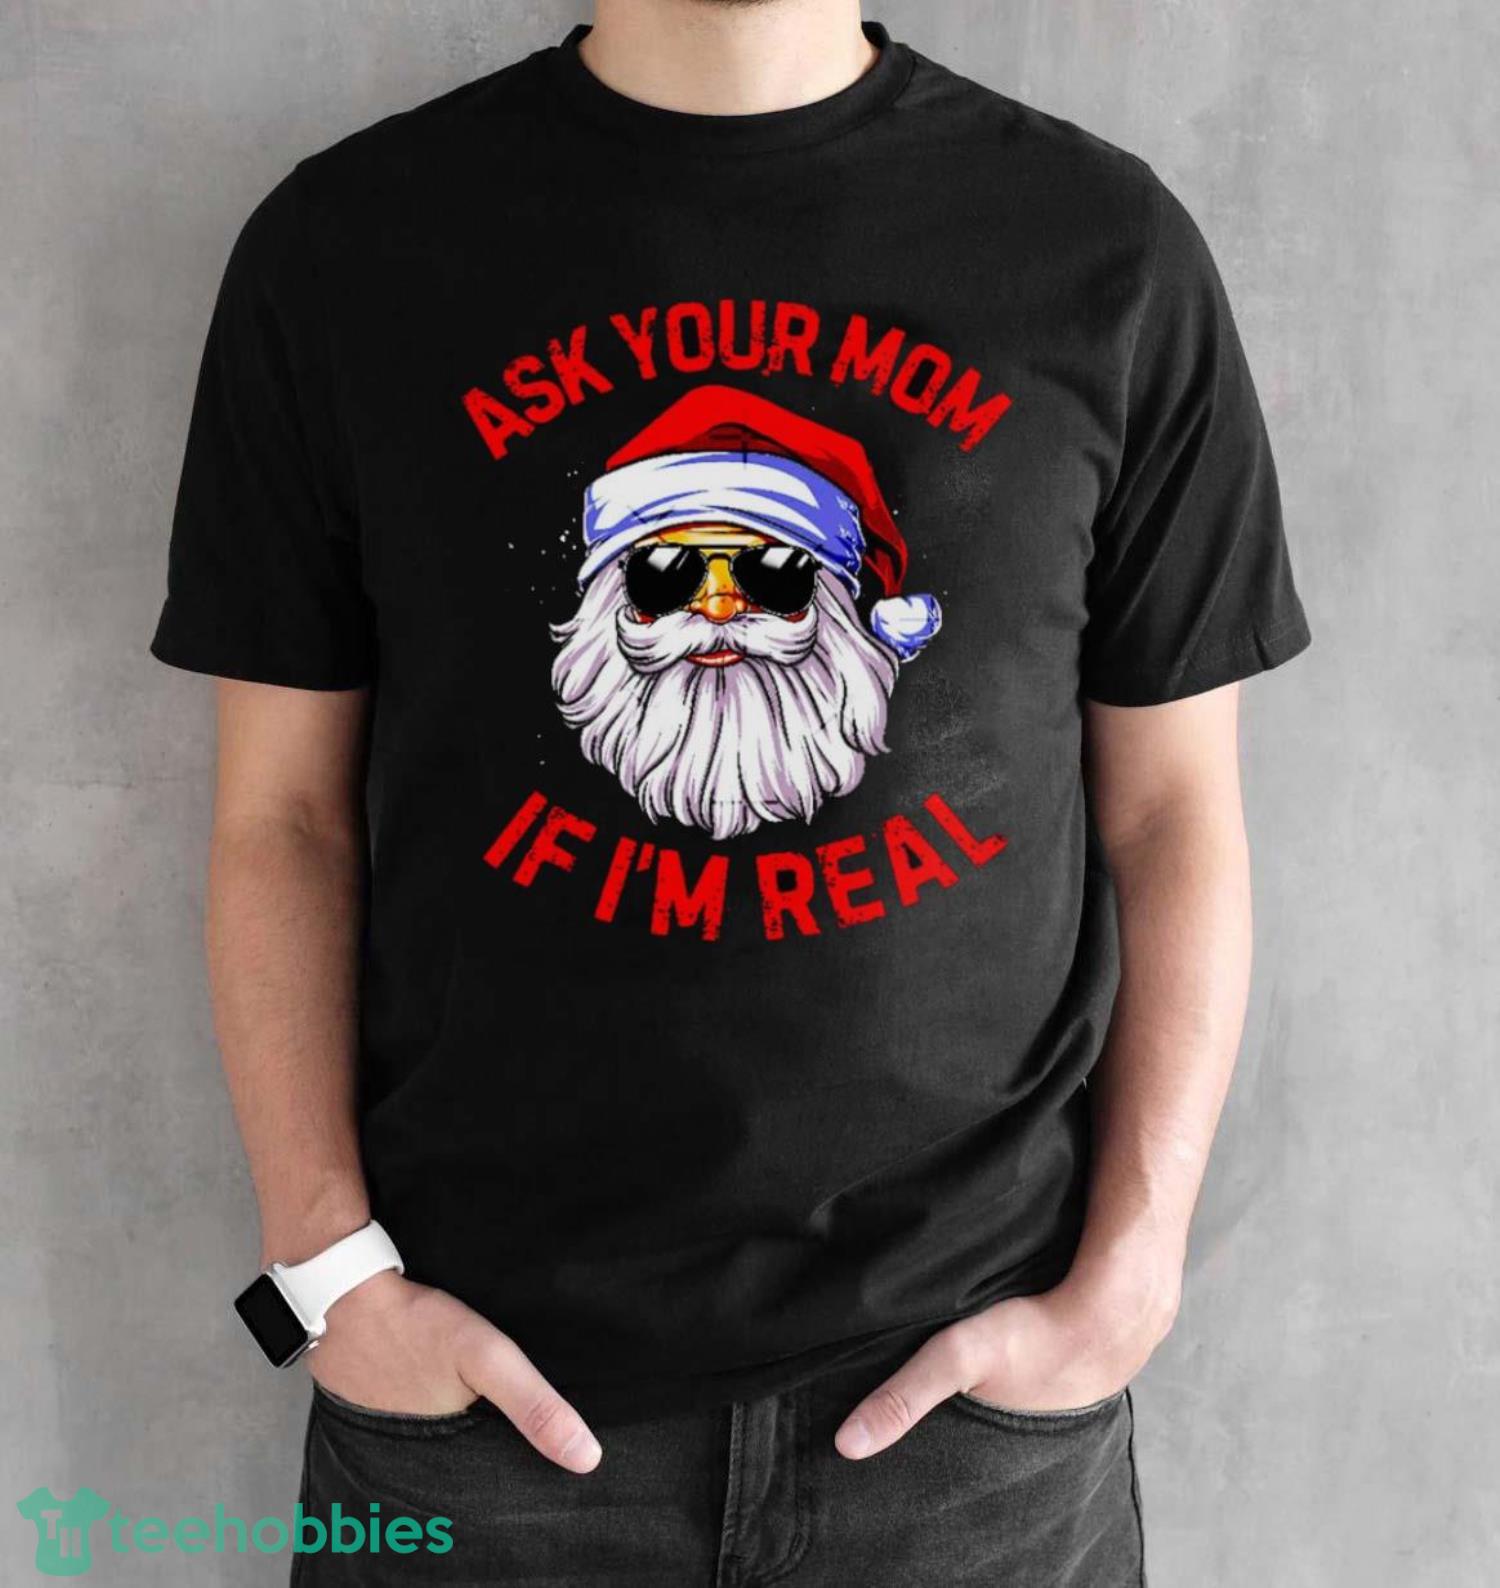 Ask Your Mom If IM Real T-Shirts - Black Unisex T-Shirt